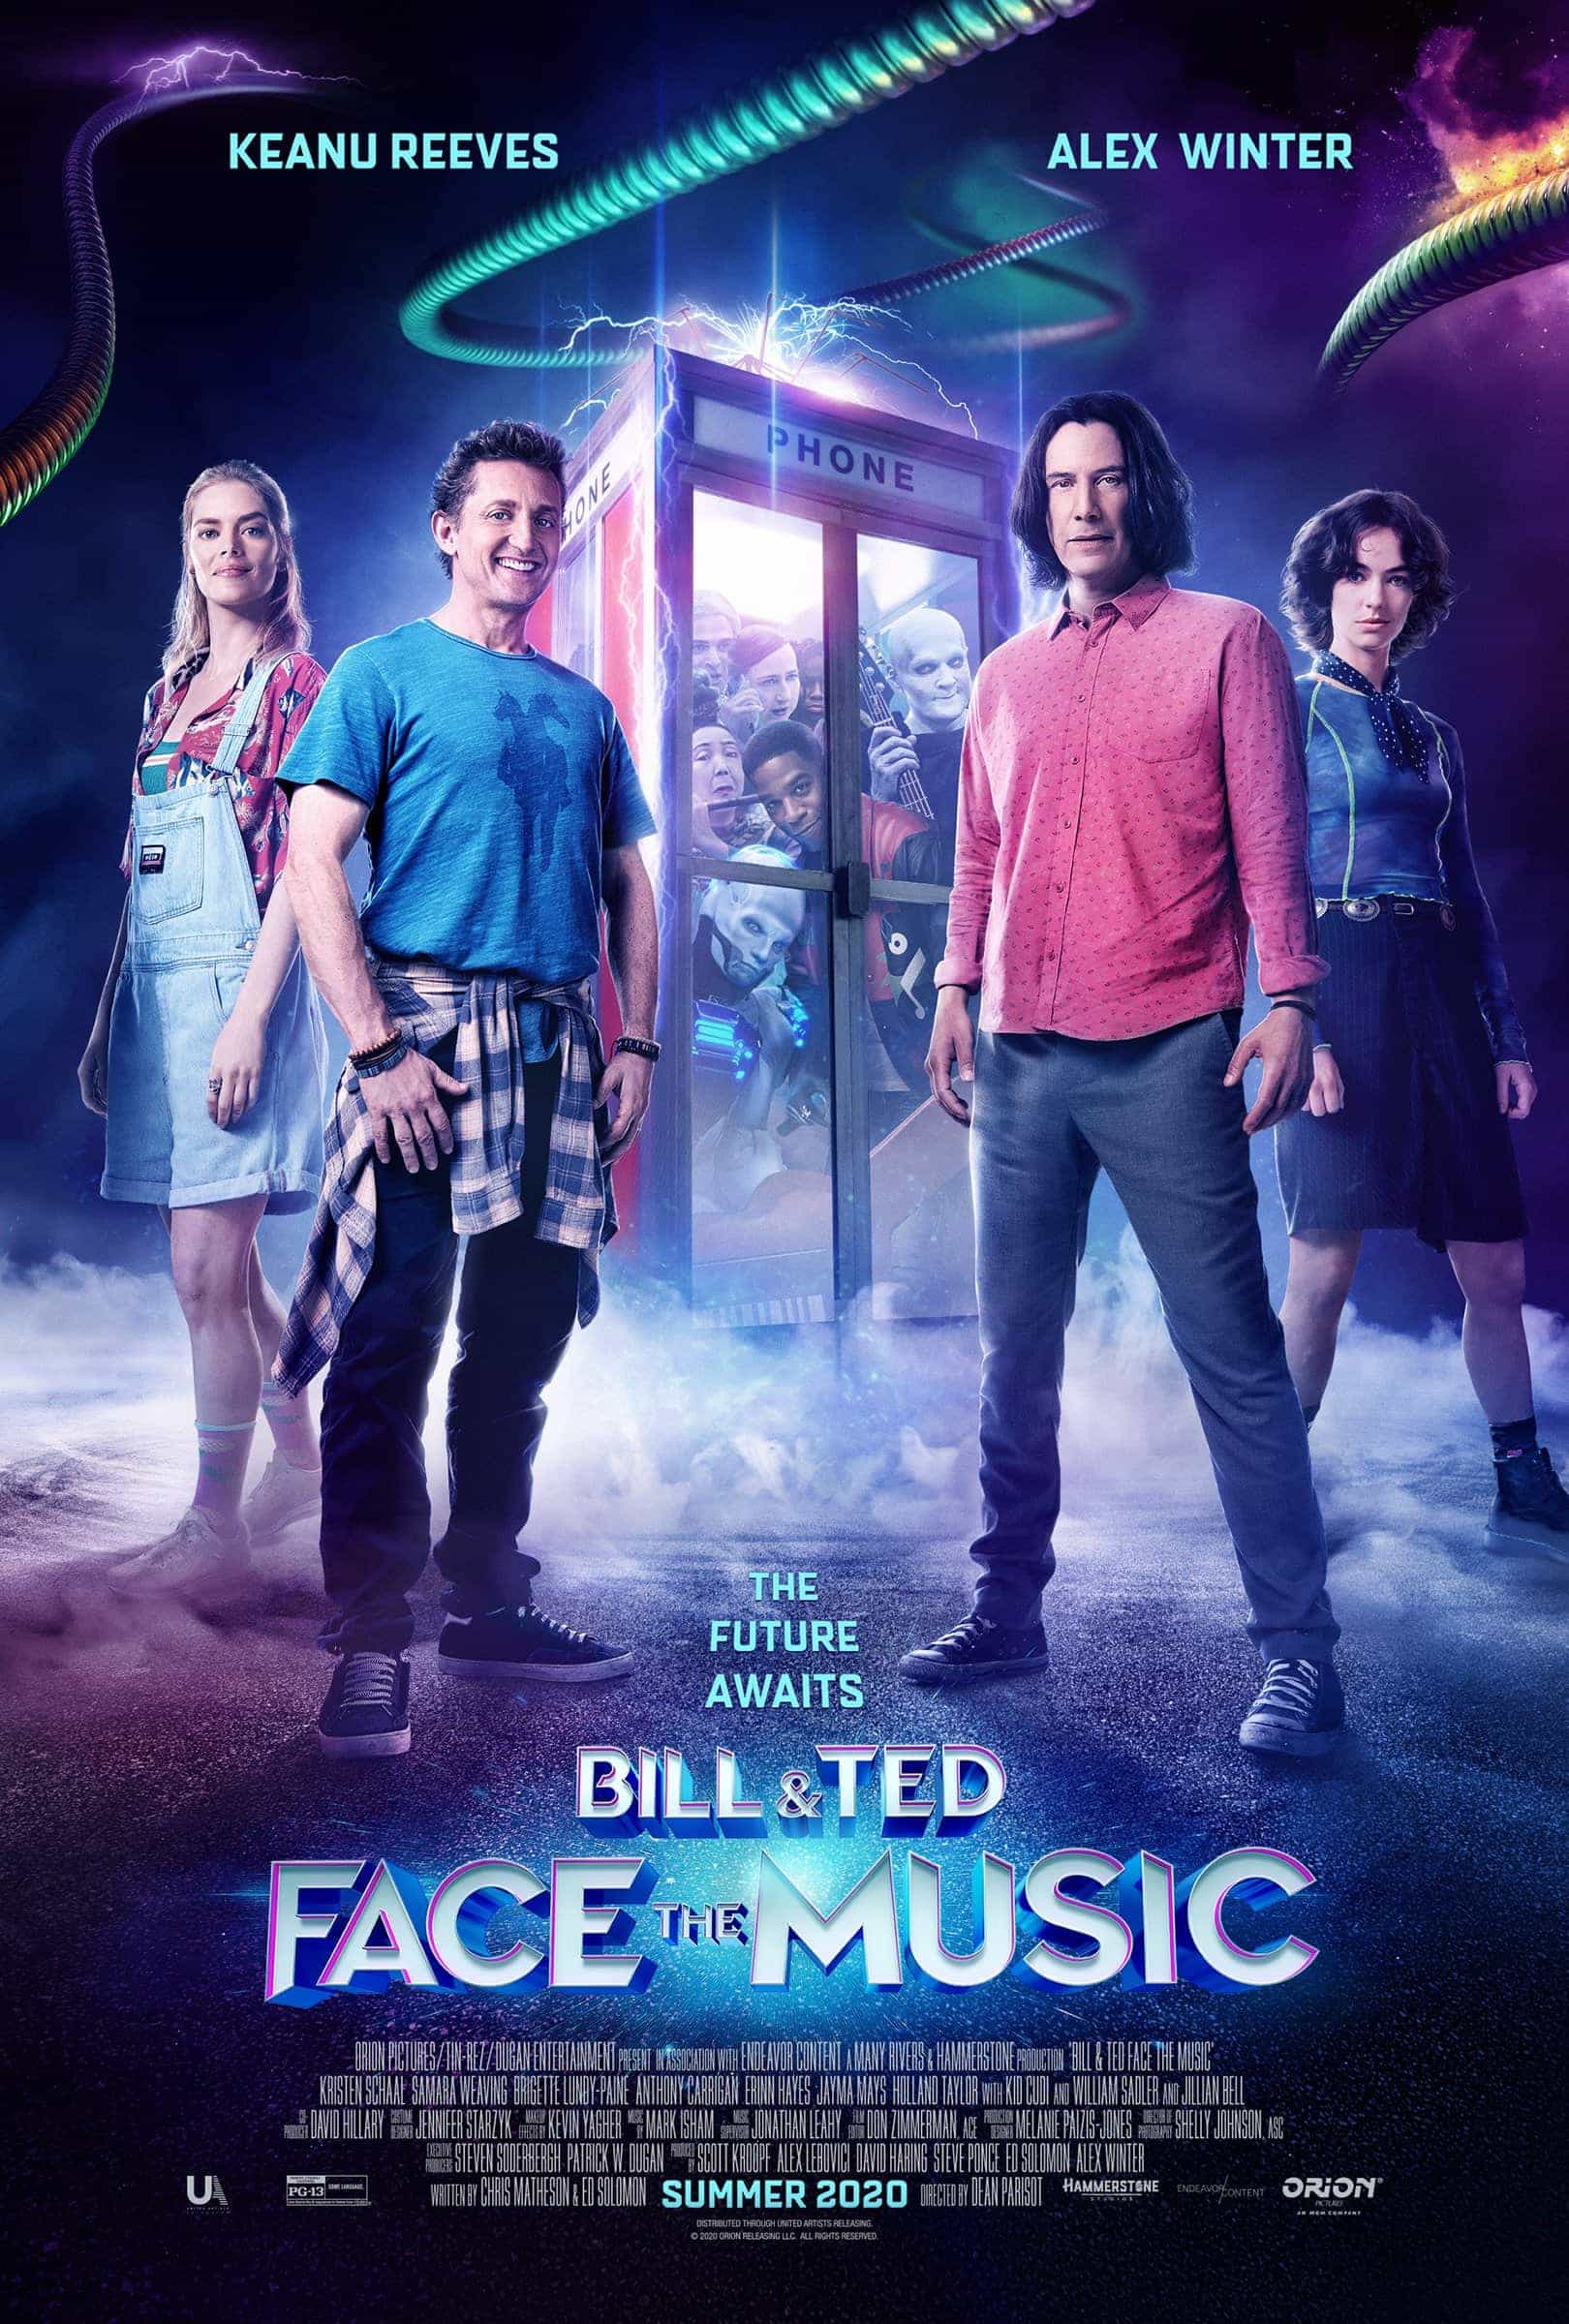 Bill And Ted Face The Music gets a 23rd September UK cinema release